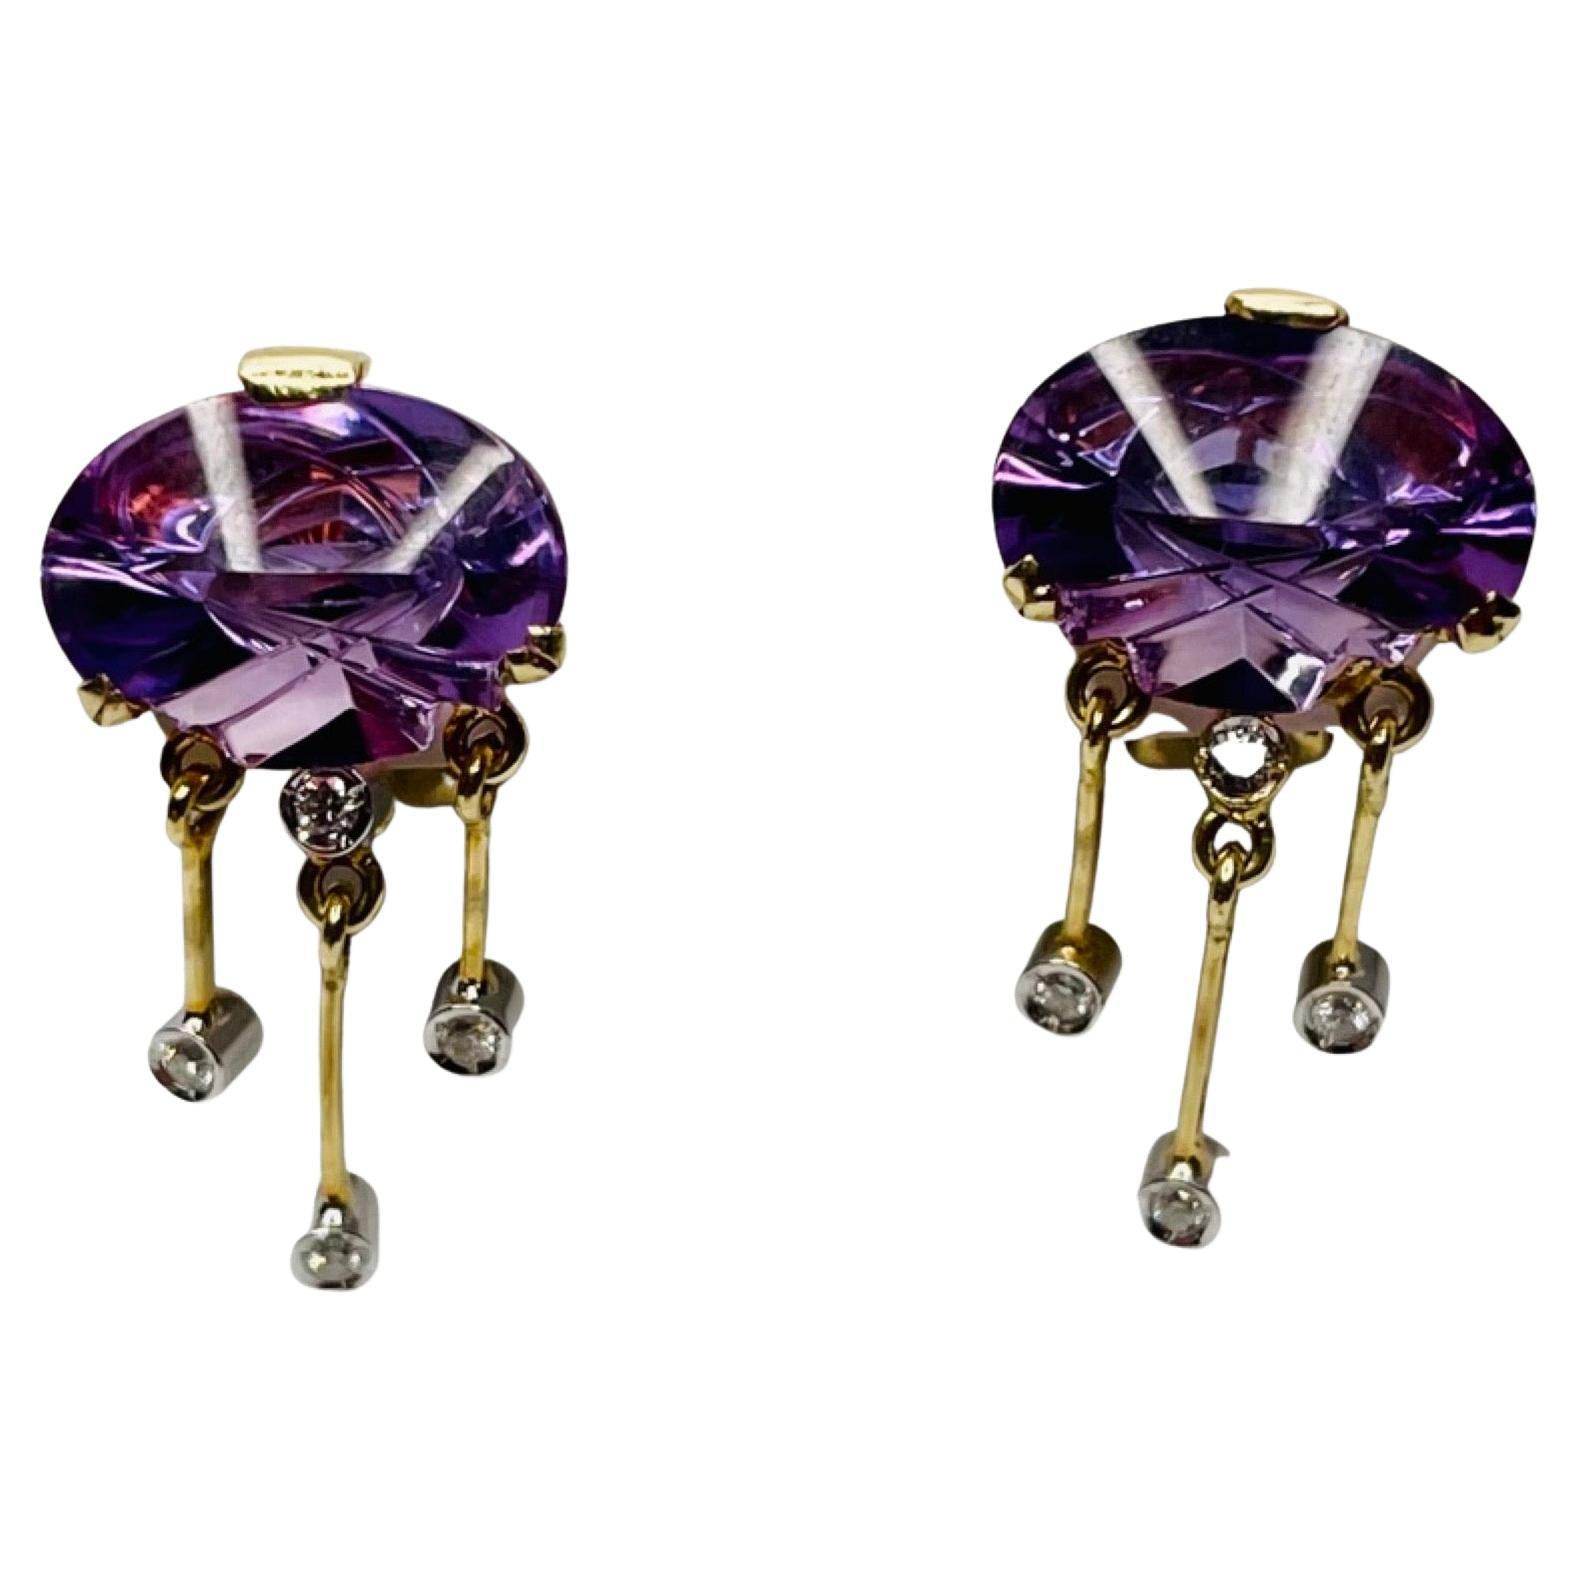 Kian 14K Yellow and White Gold Laser Cut Amethyst and Diamond Earrings